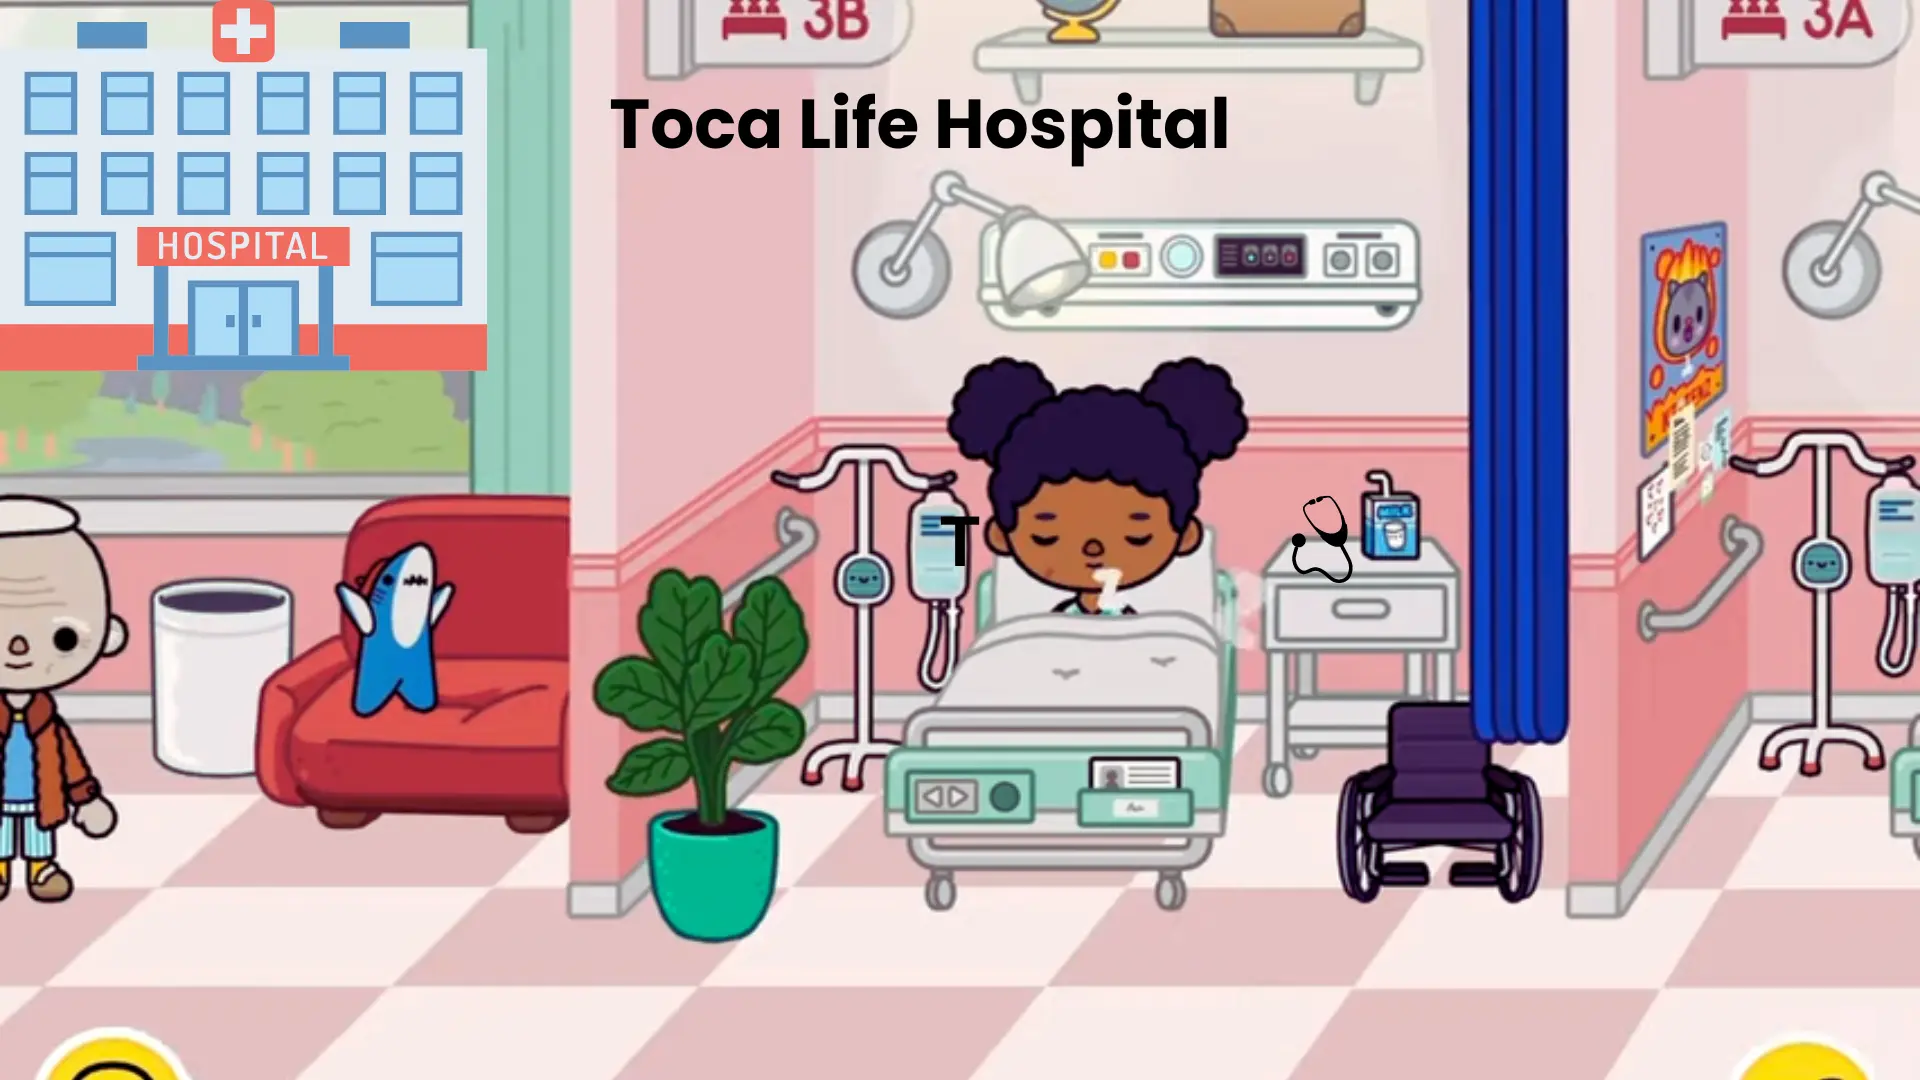 Experience Toca Life Hospital's medical adventures